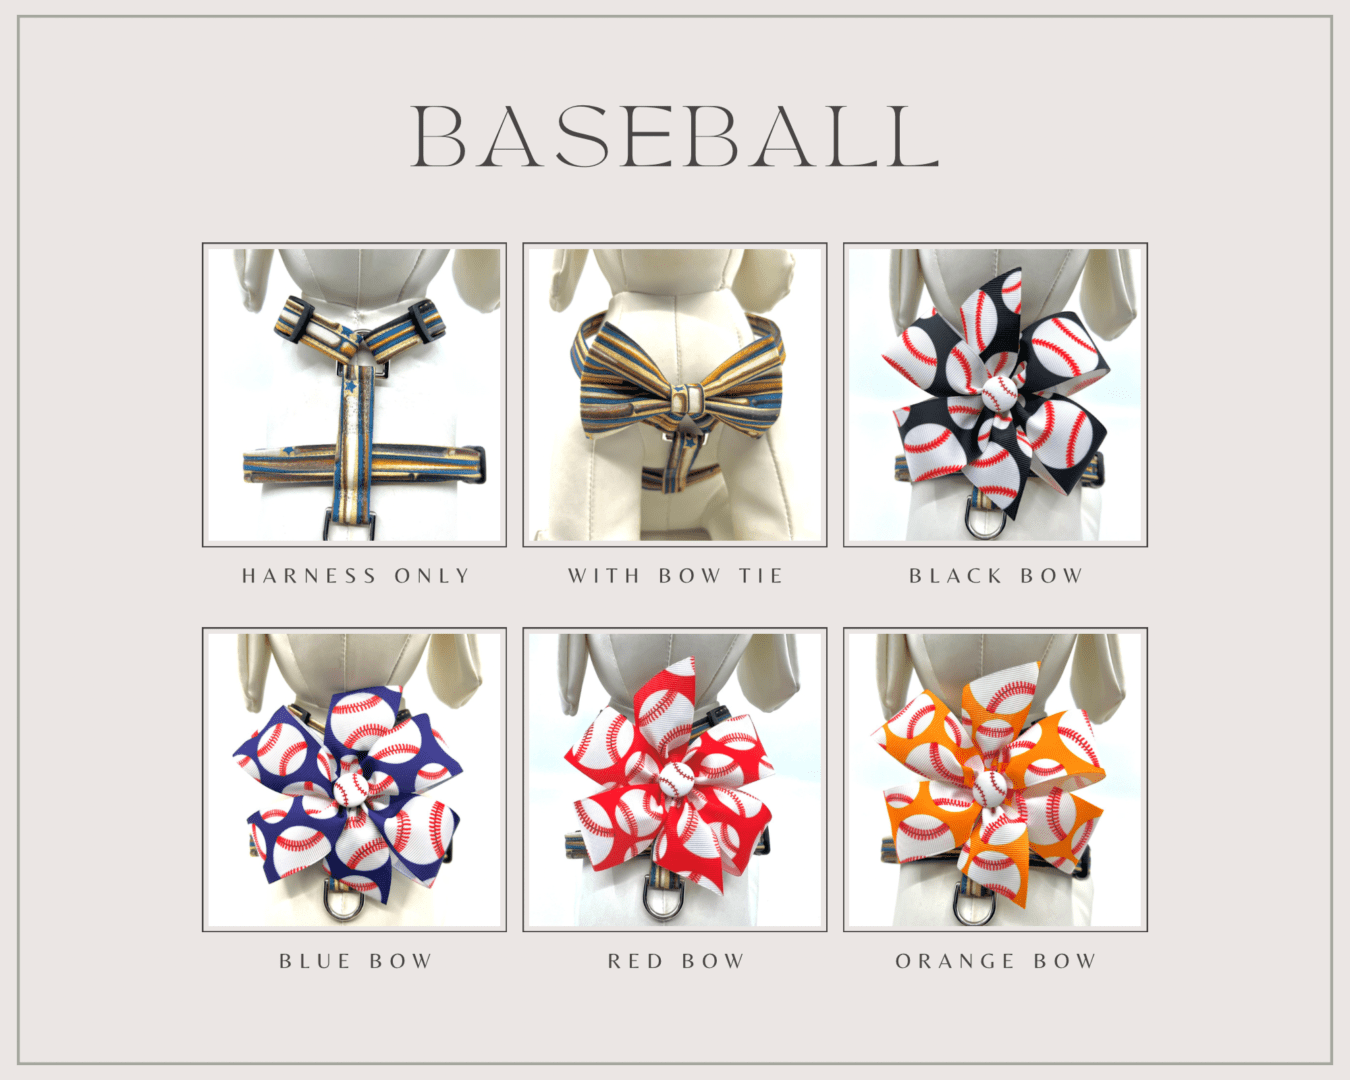 A bunch of different baseball bows and ties